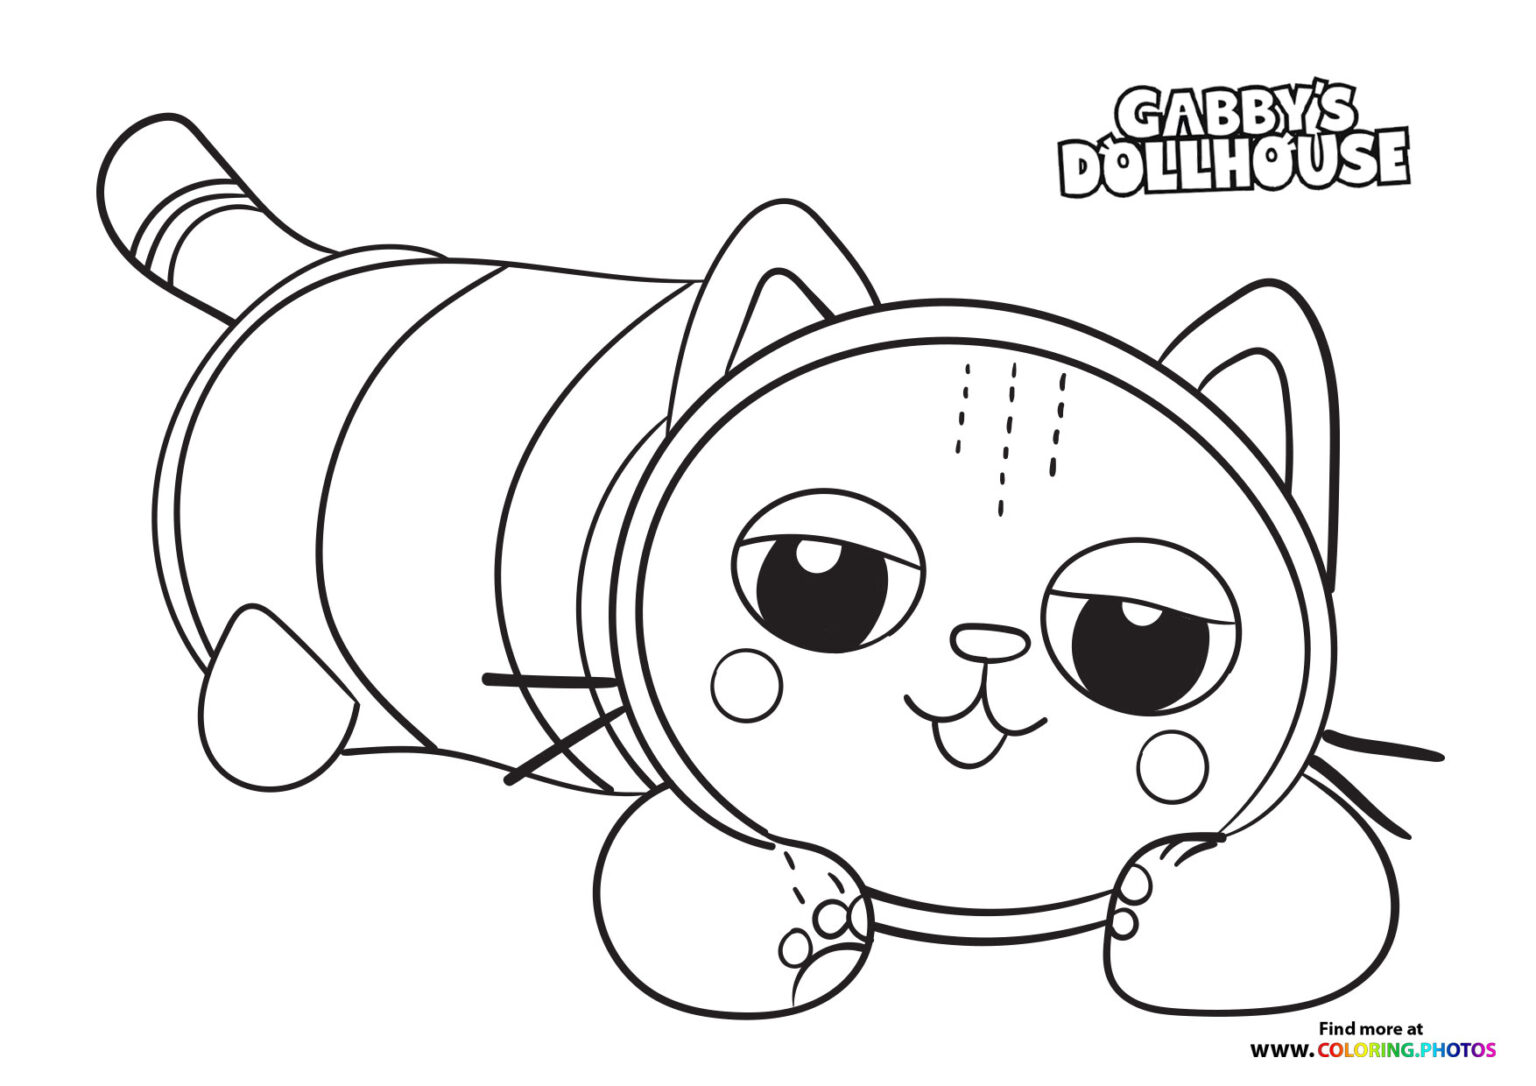 Mercat Gaby's Dollhouse Coloring Pages for kids